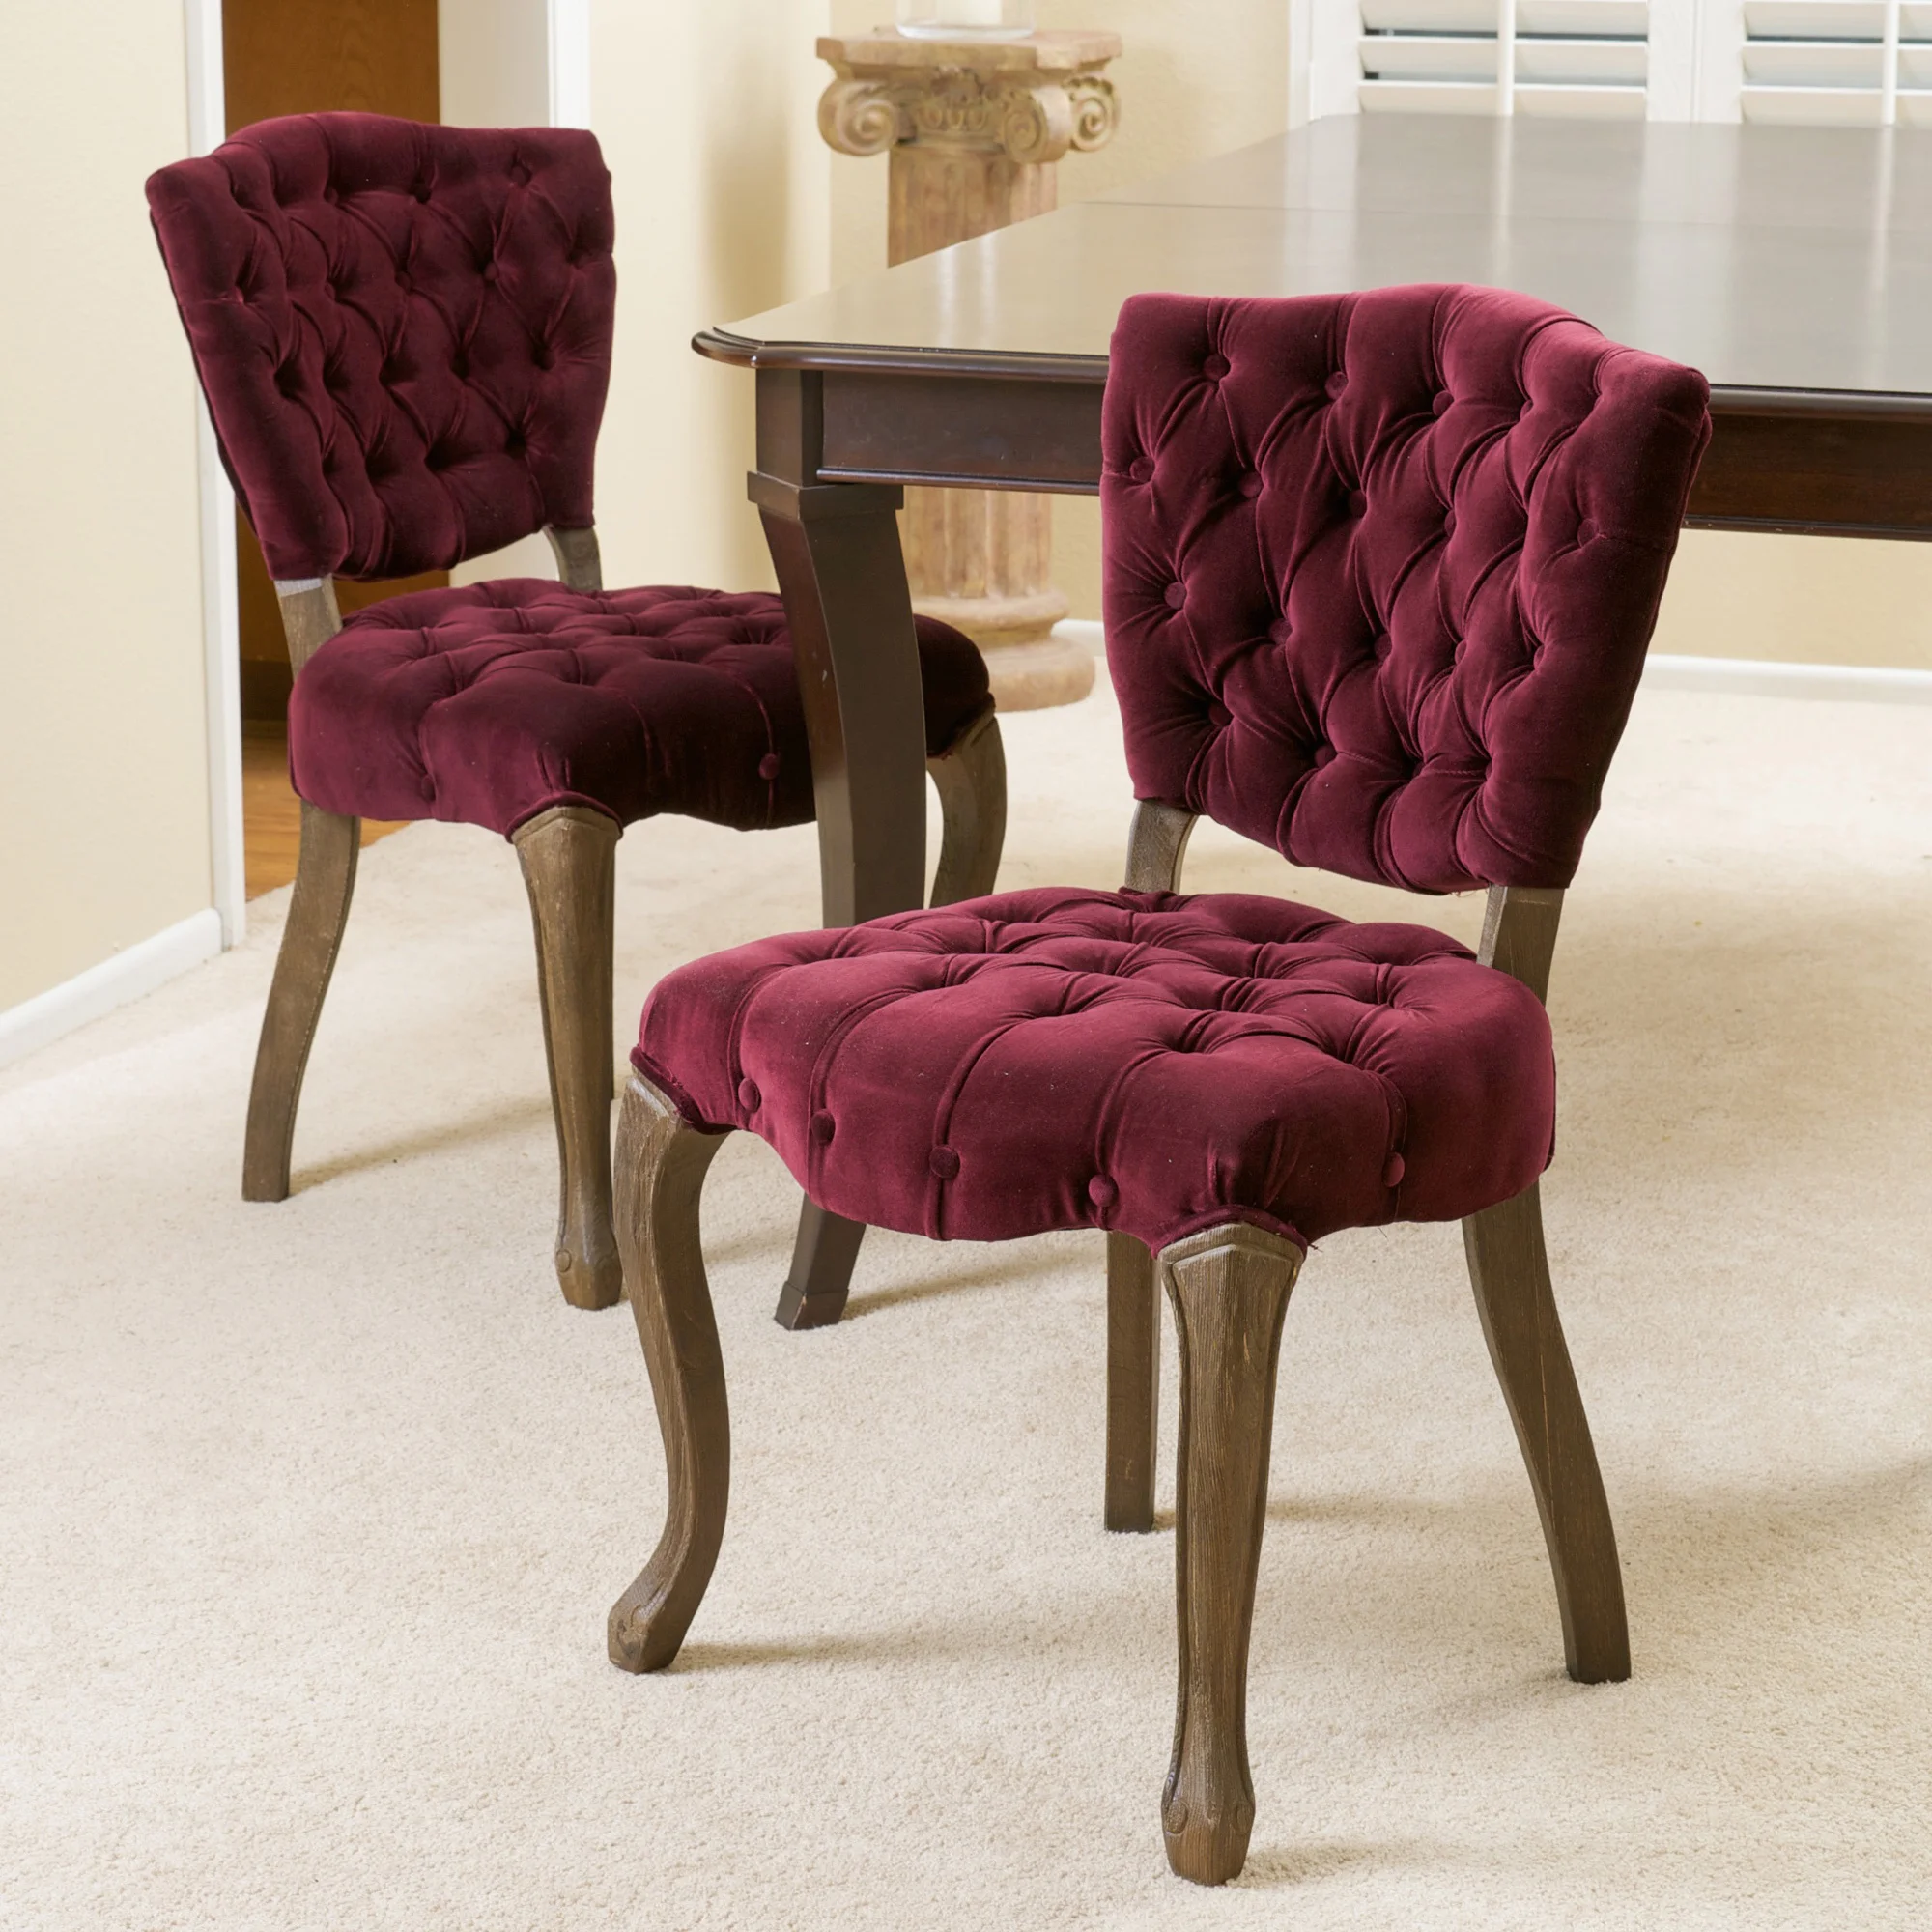 Bates Tufted Dark Purple Fabric Dining Chairs (Set of 2) by Christopher Knight Home